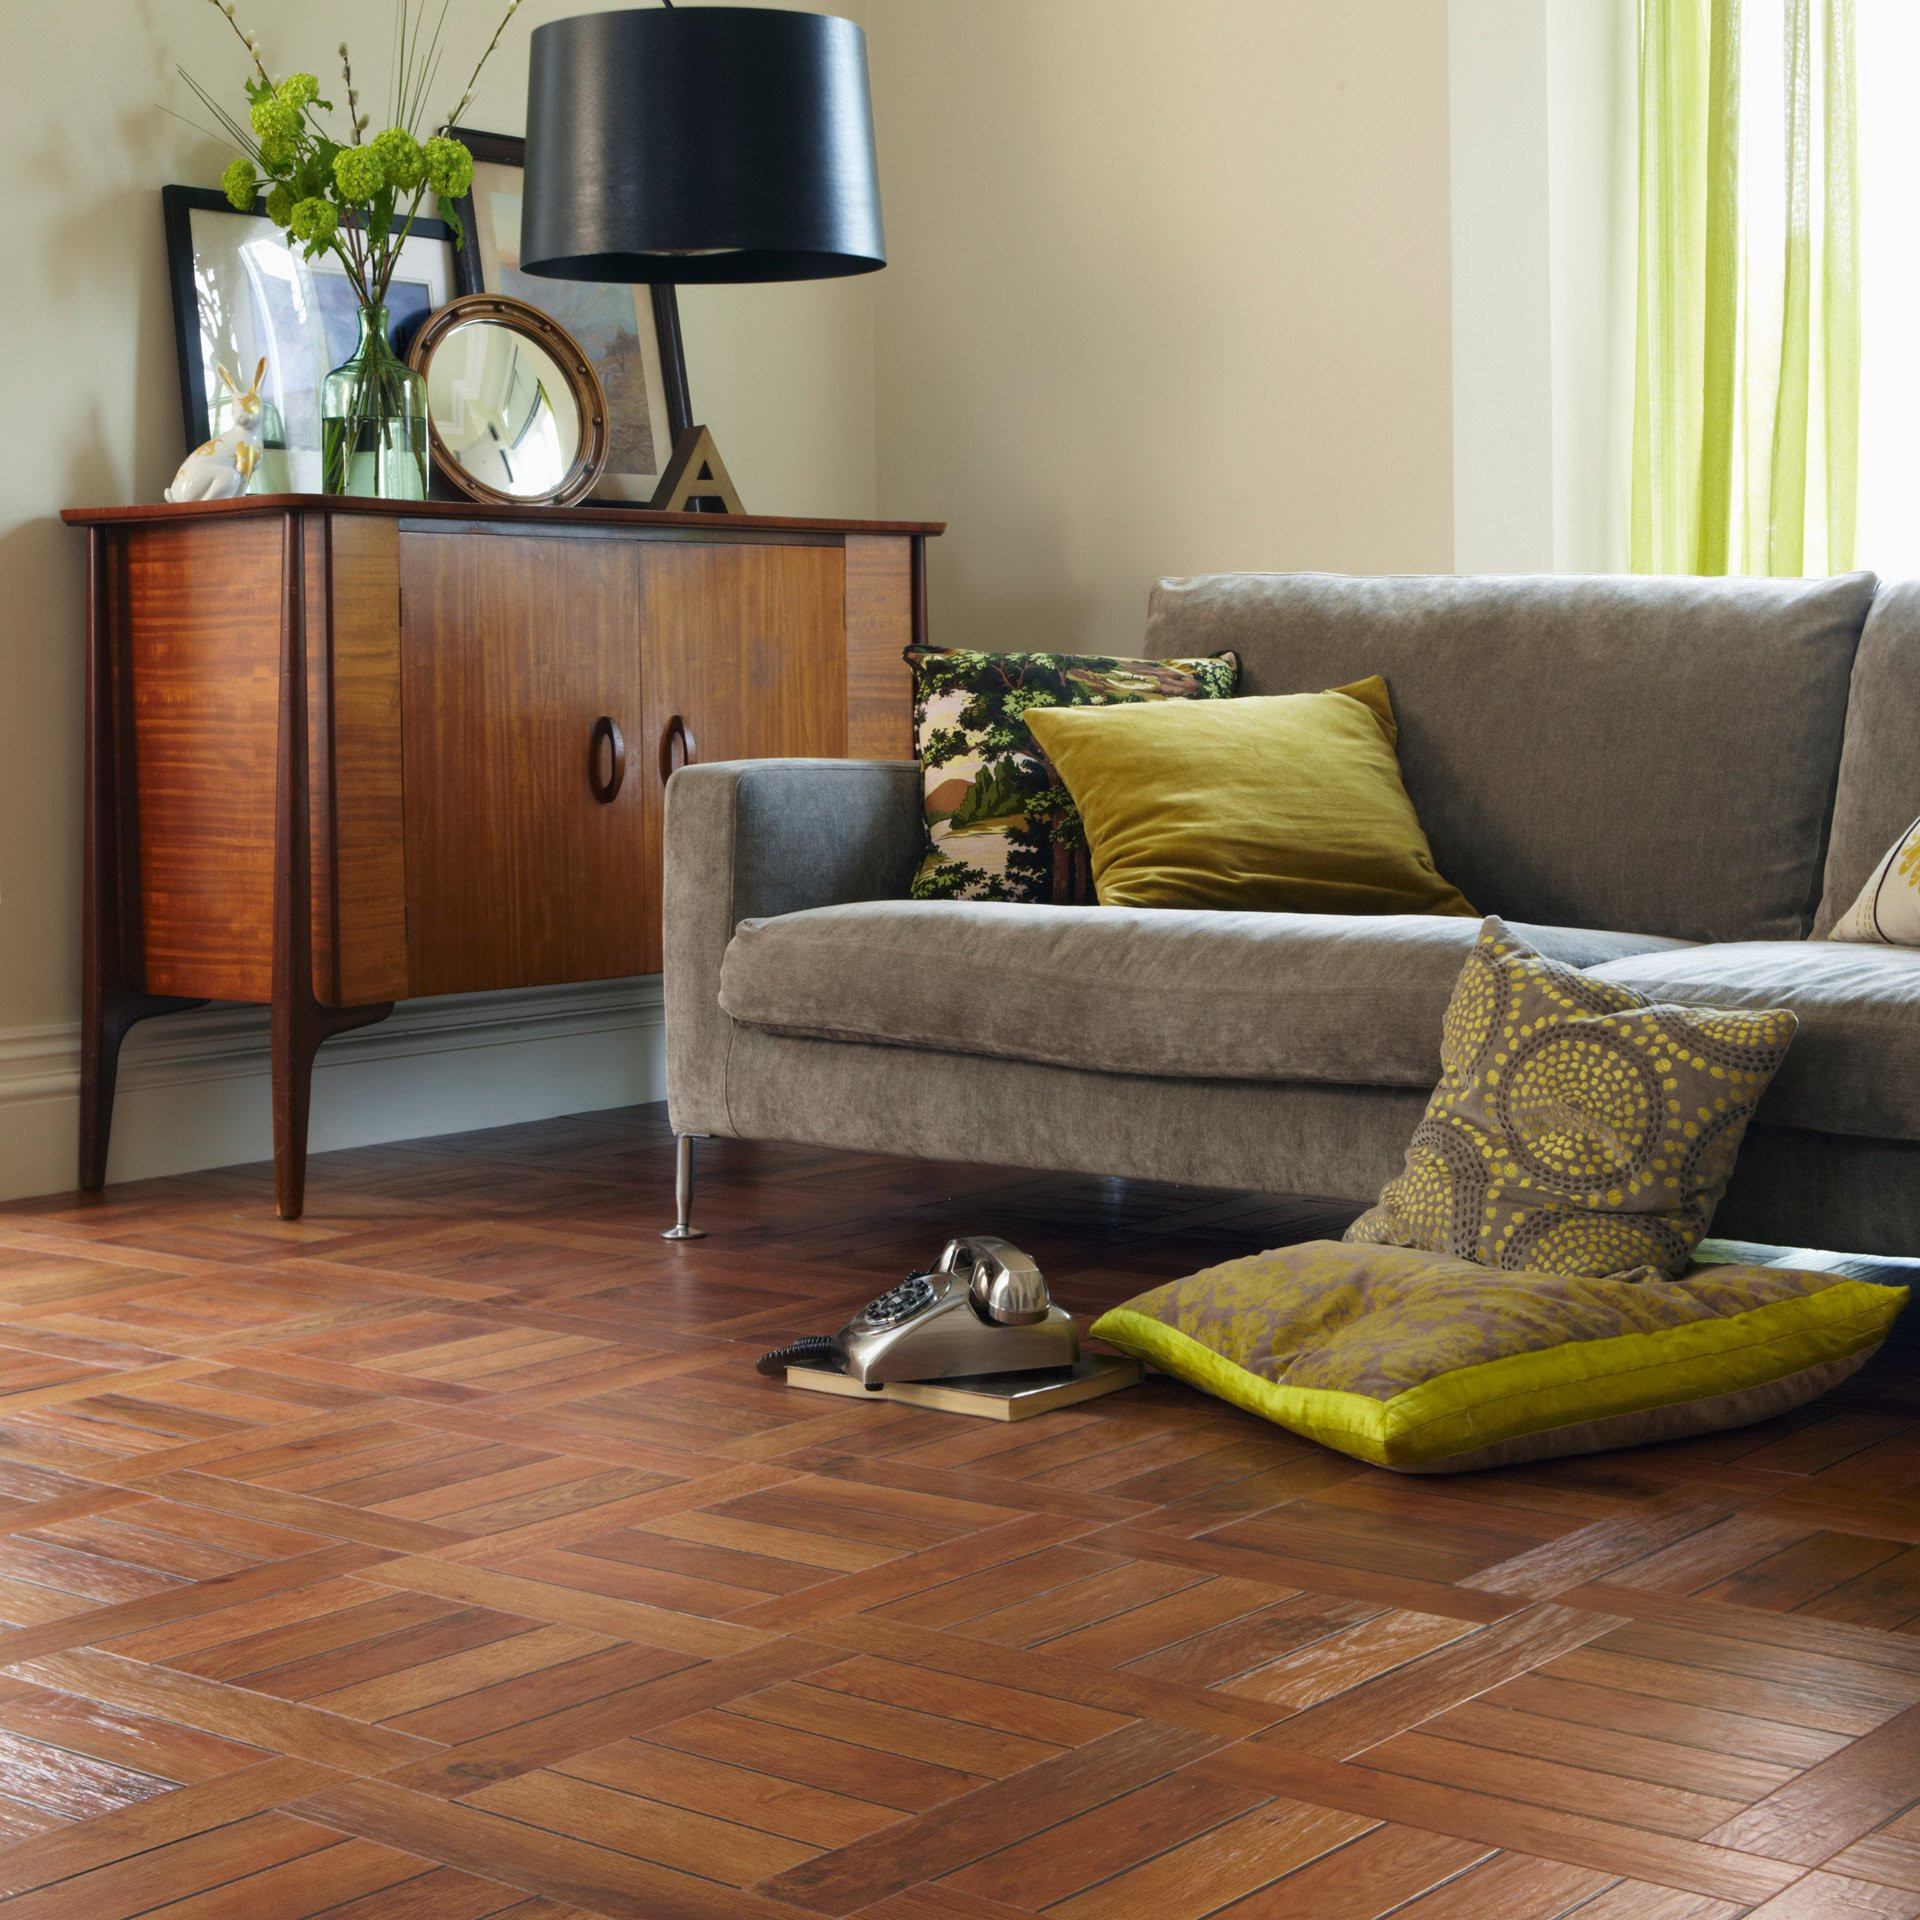 Floors Ideas For Living Room
 Lounge Flooring Ideas for Your Home